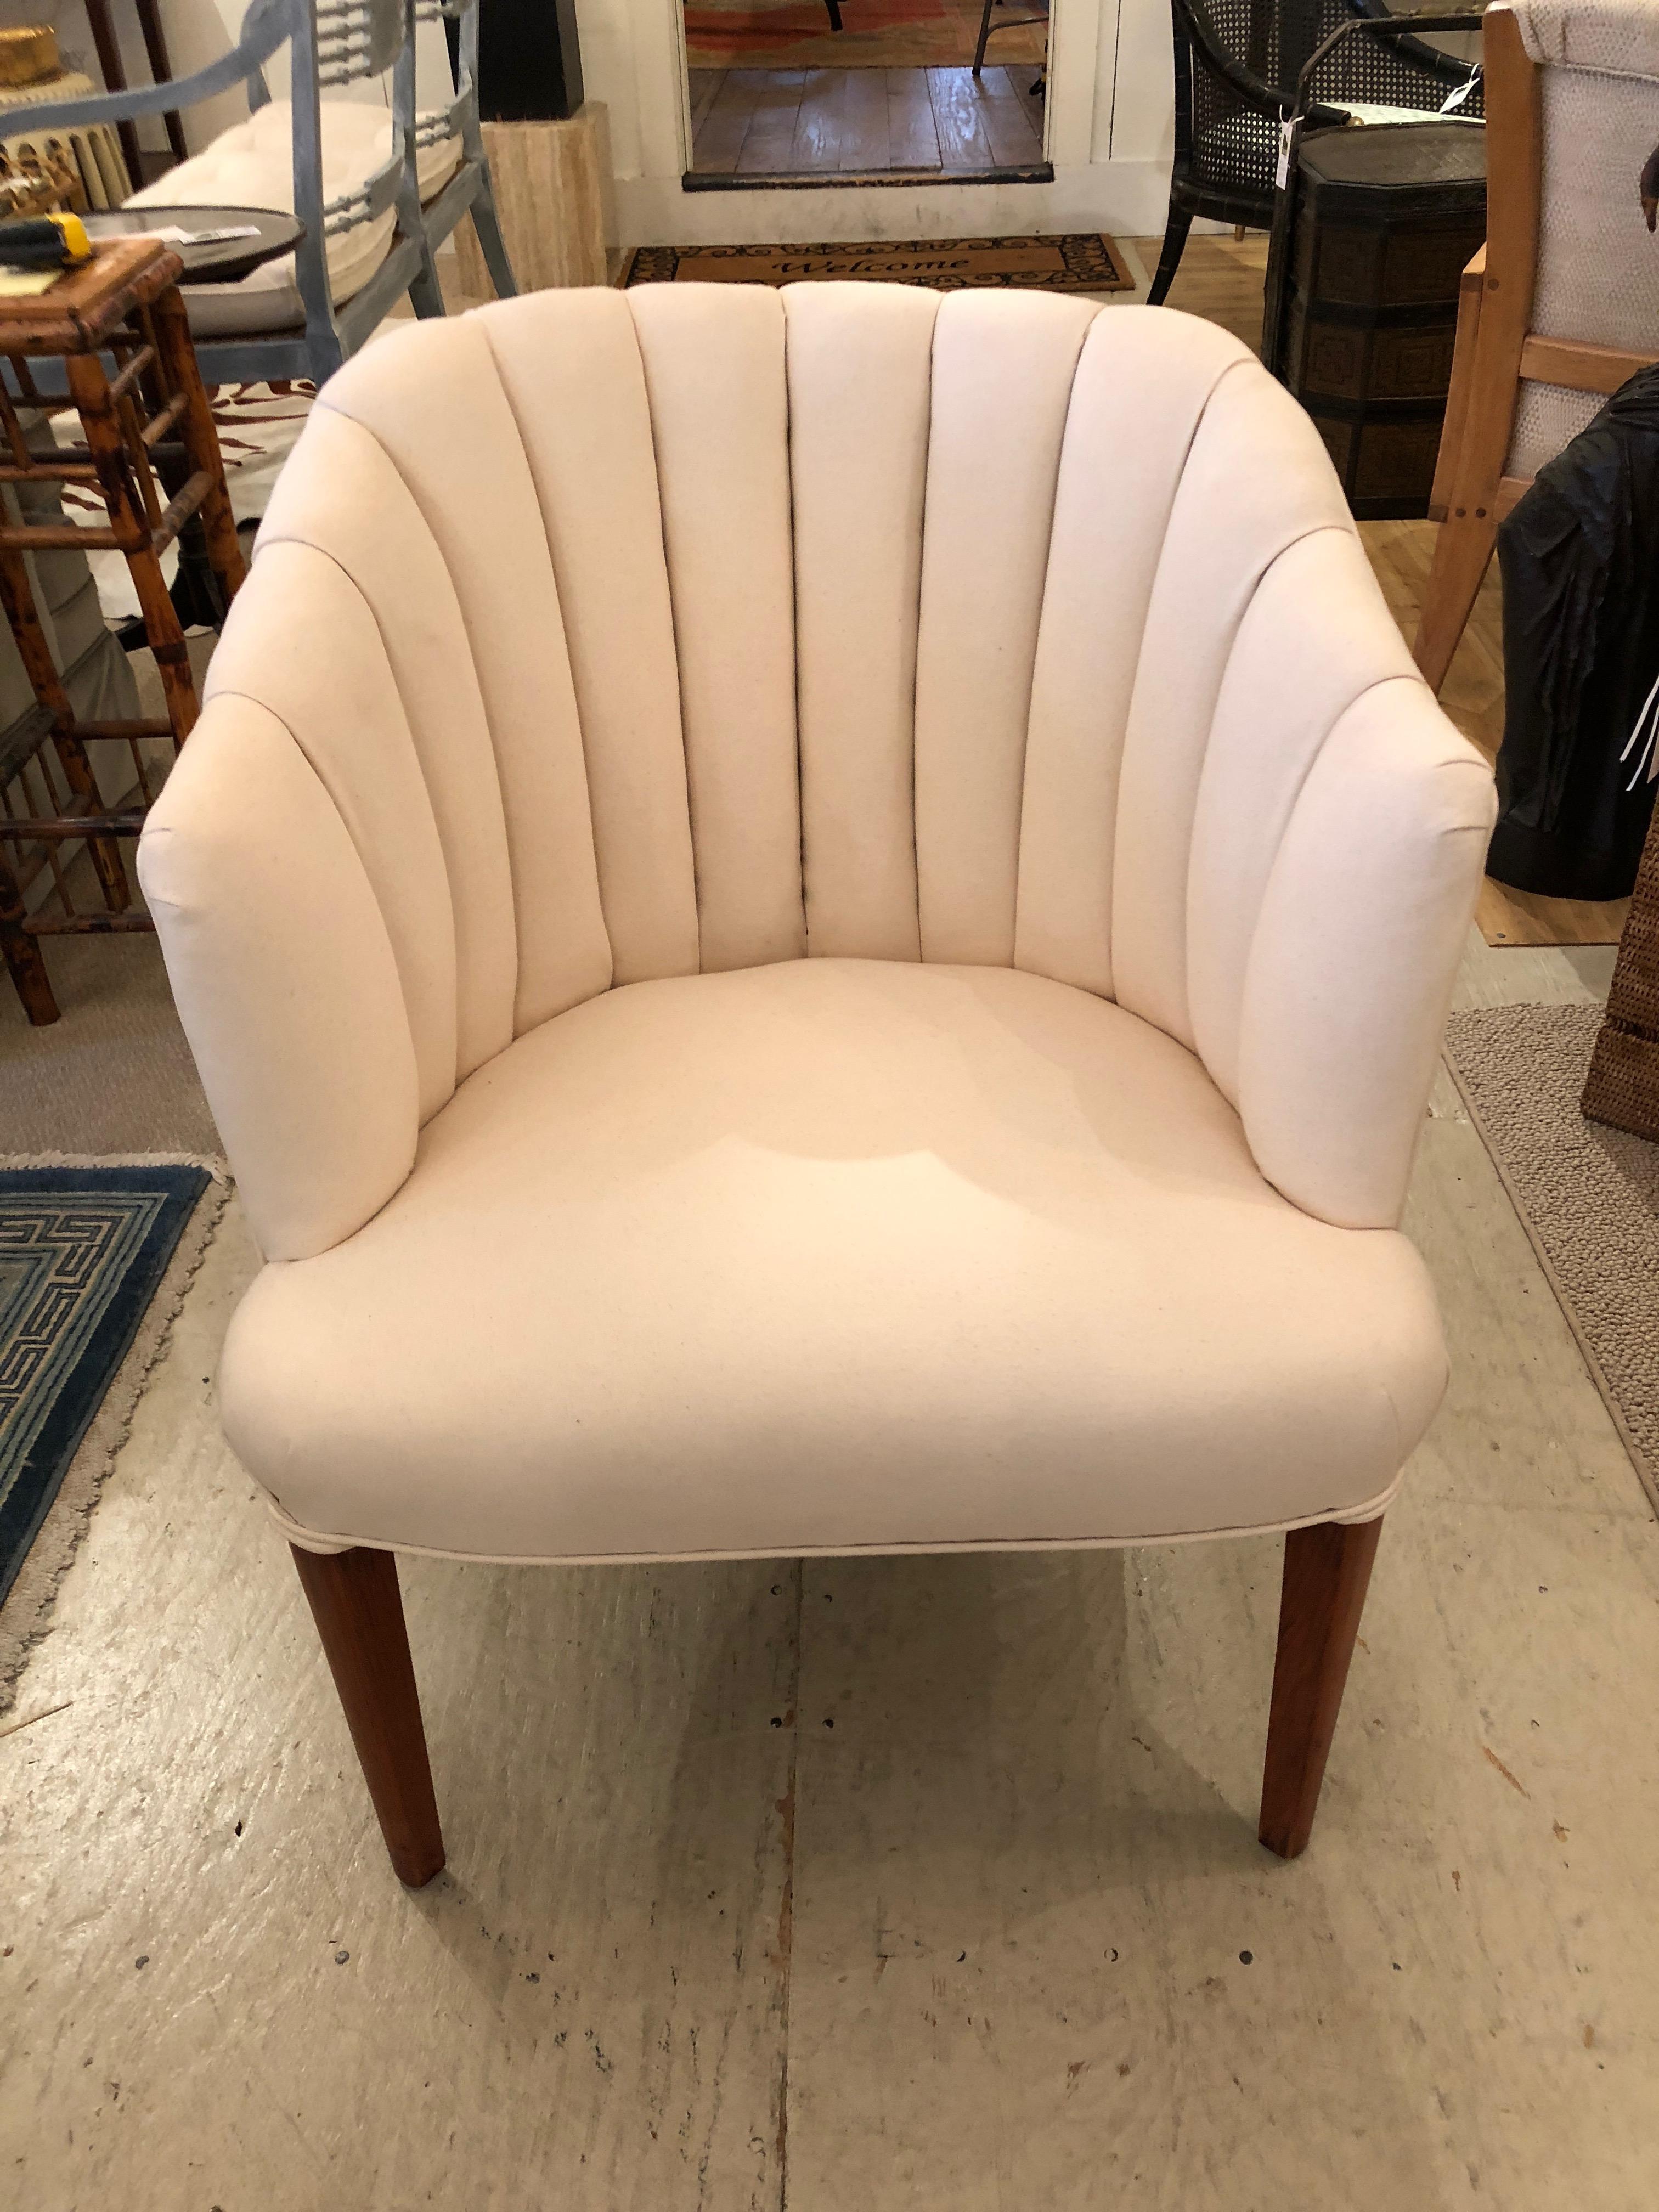 Pair of Classy Newly Upholstered Channel Back Club Chairs (Mitte des 20. Jahrhunderts)